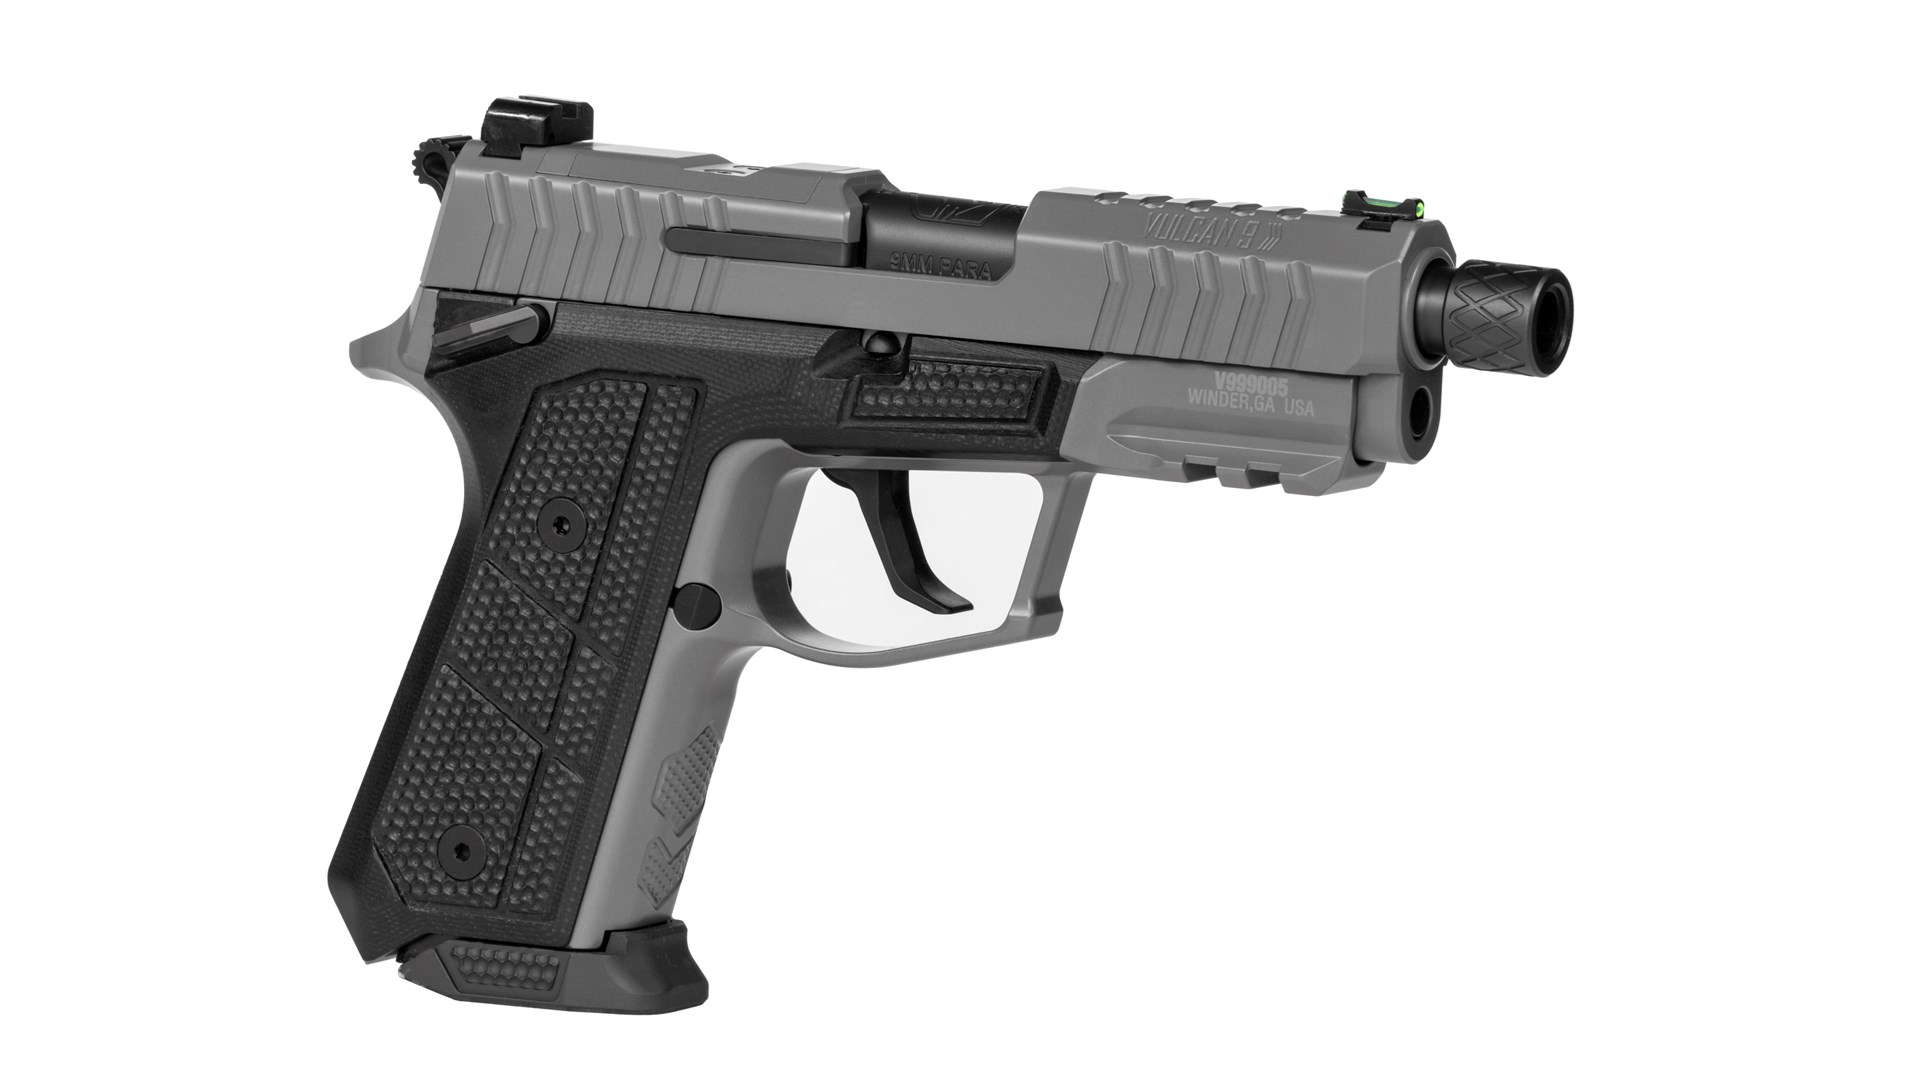 A gray-colored Lionheart Vulcan 9 shown with a threaded barrel.